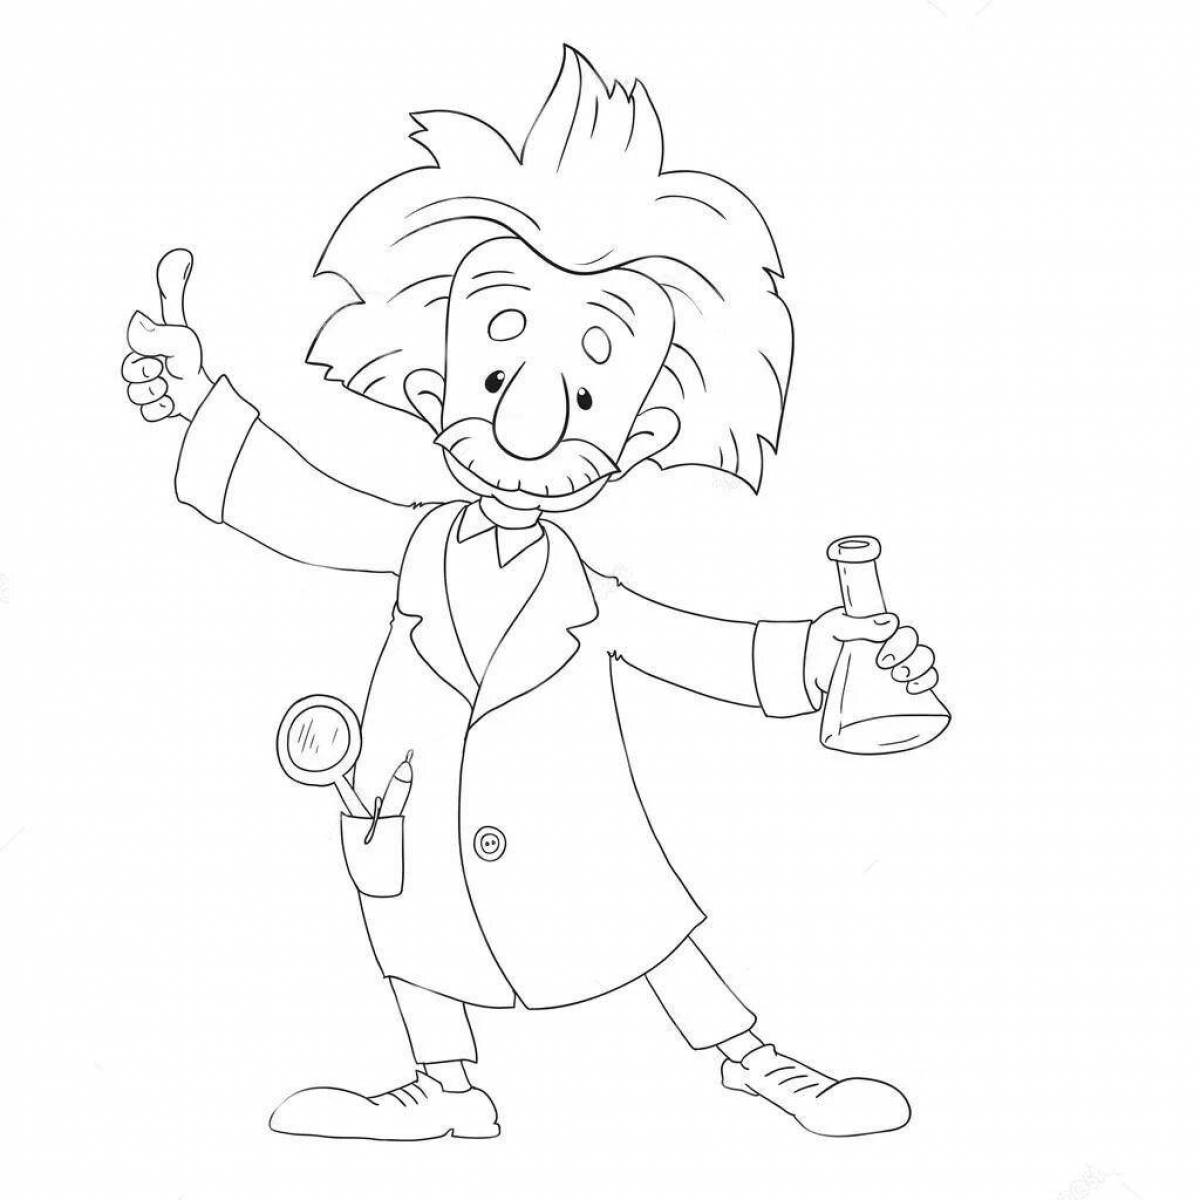 Fun coloring pages of scientists for kids